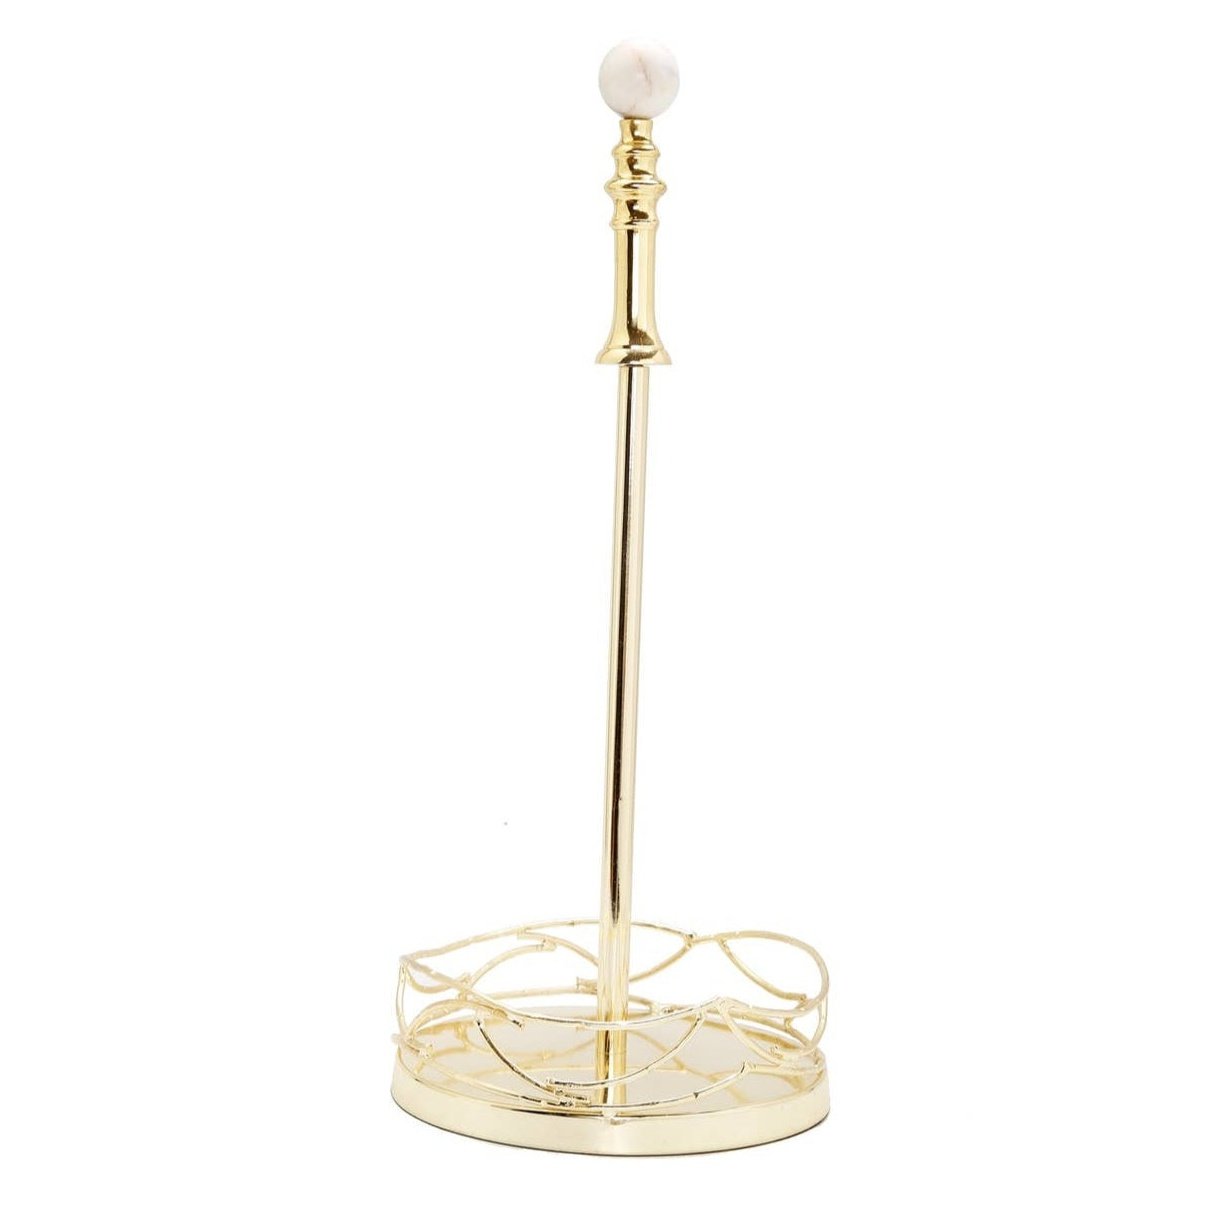 Gold Paper Towel Holder w/ Wired Design - Exquisite Designs Home Décor 